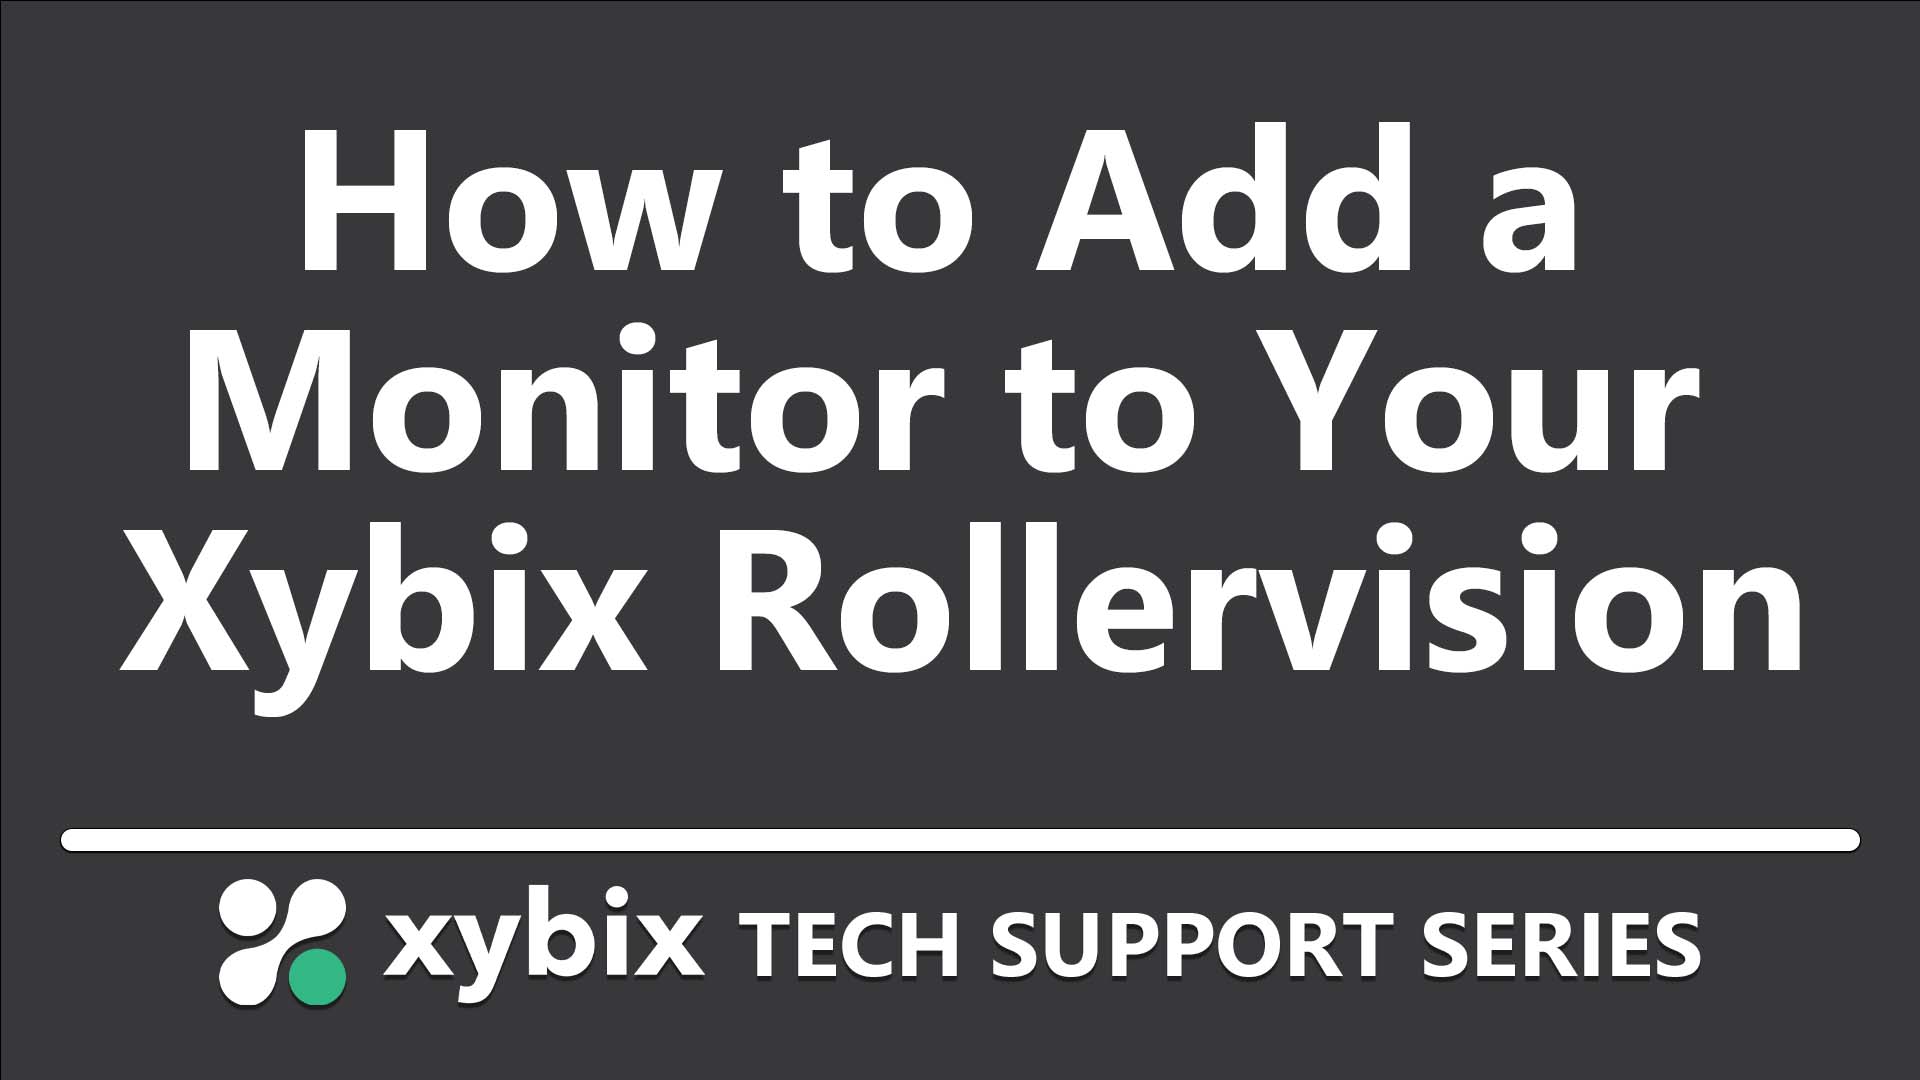 Adding a Monitor to Rollervision